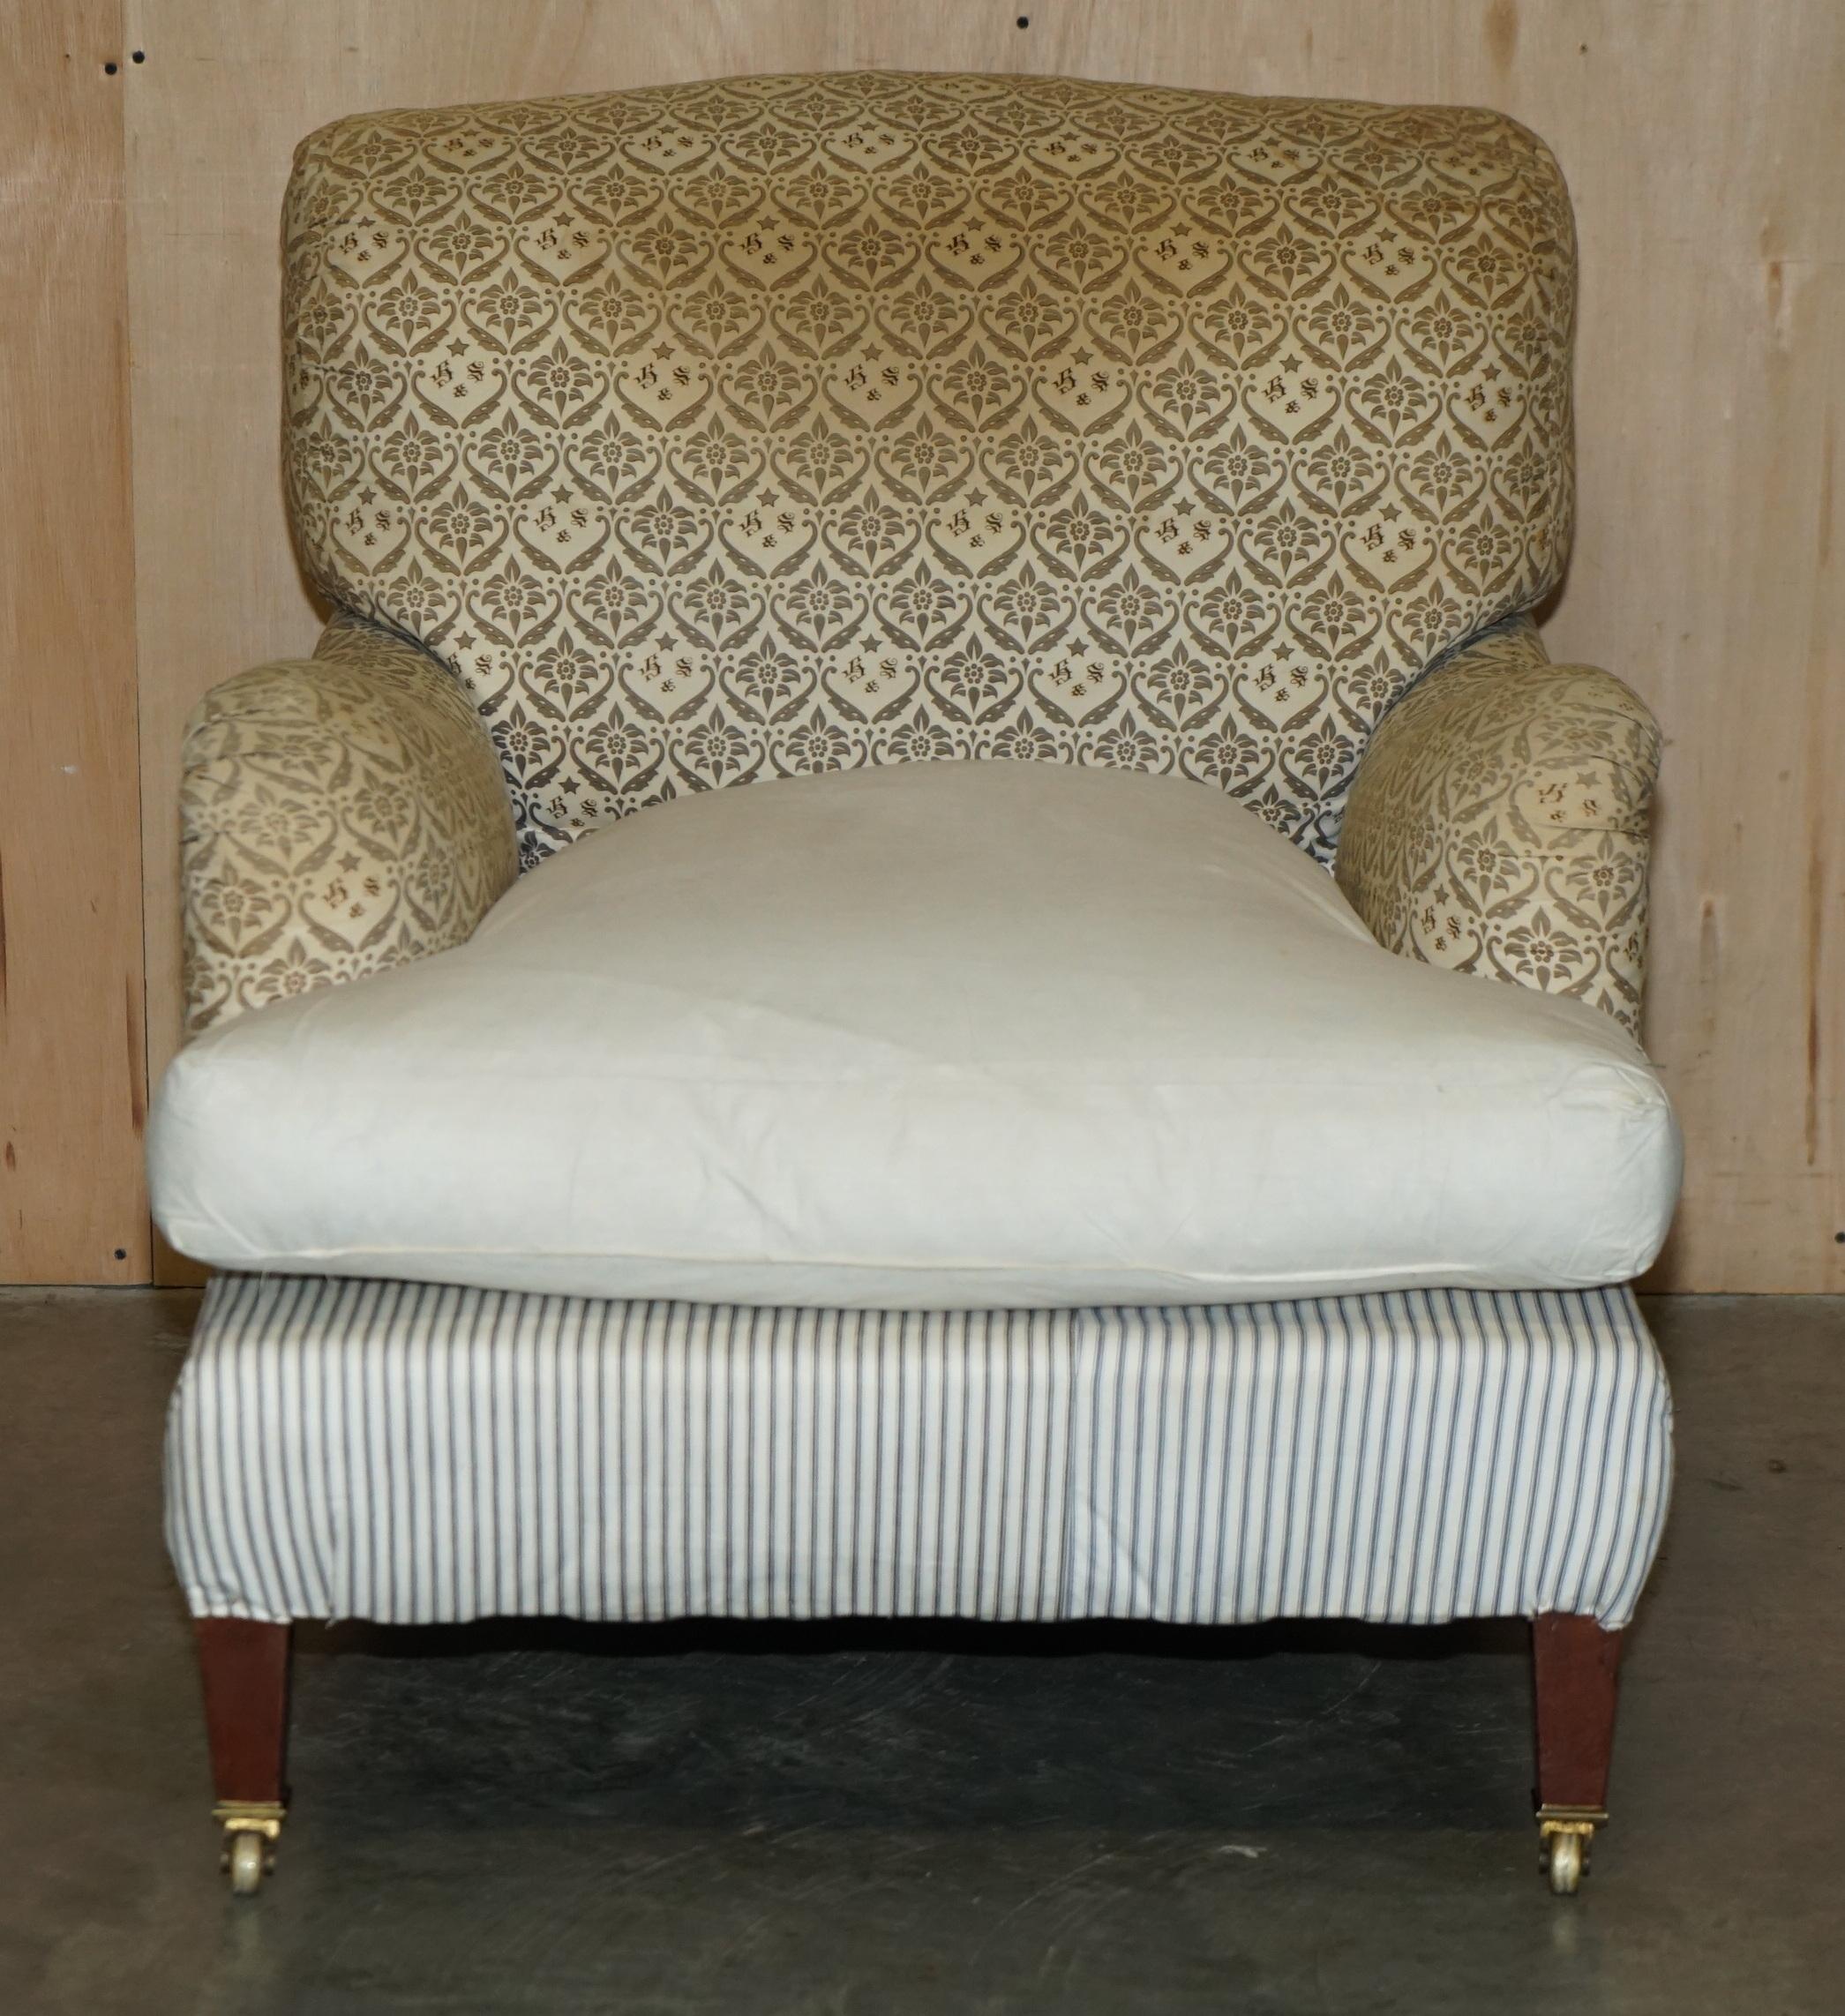 Hand-Crafted ANTIQUE VICTORIAN 1890 ORIGINAL TICKING FABRIC HOWARD & SON'S IVOR ARMCHAiR For Sale